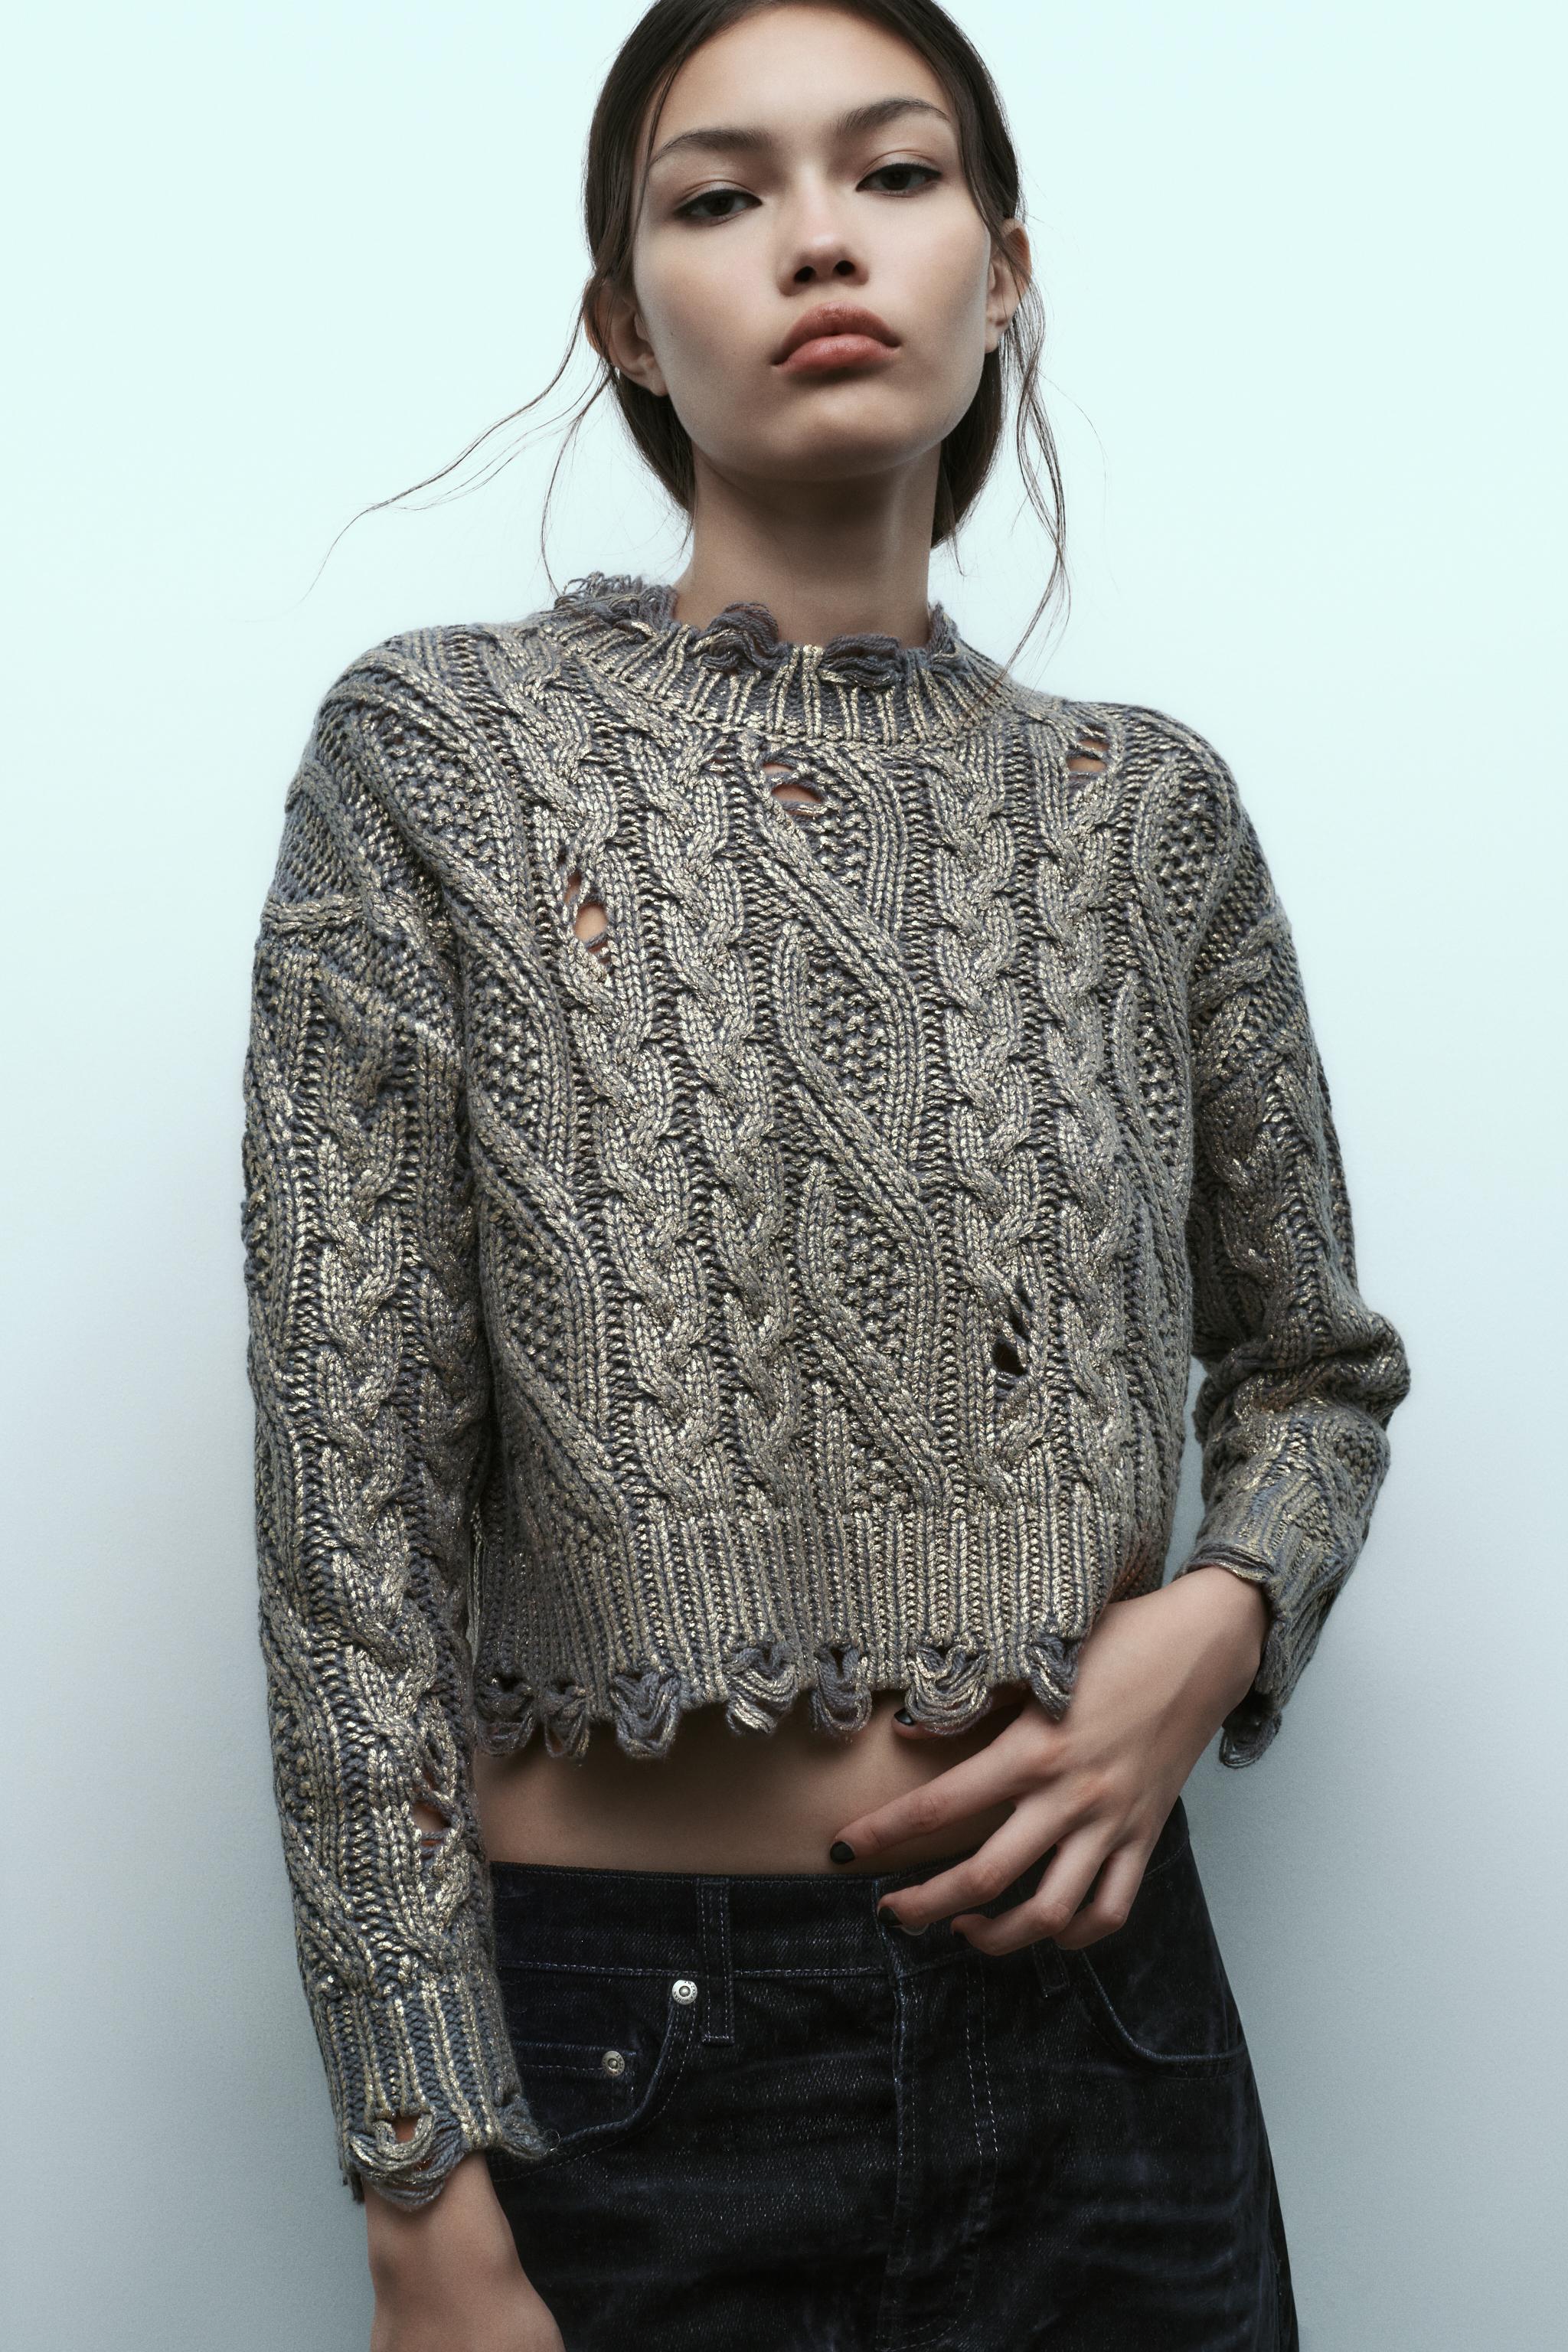 Cable-knit Crop Top